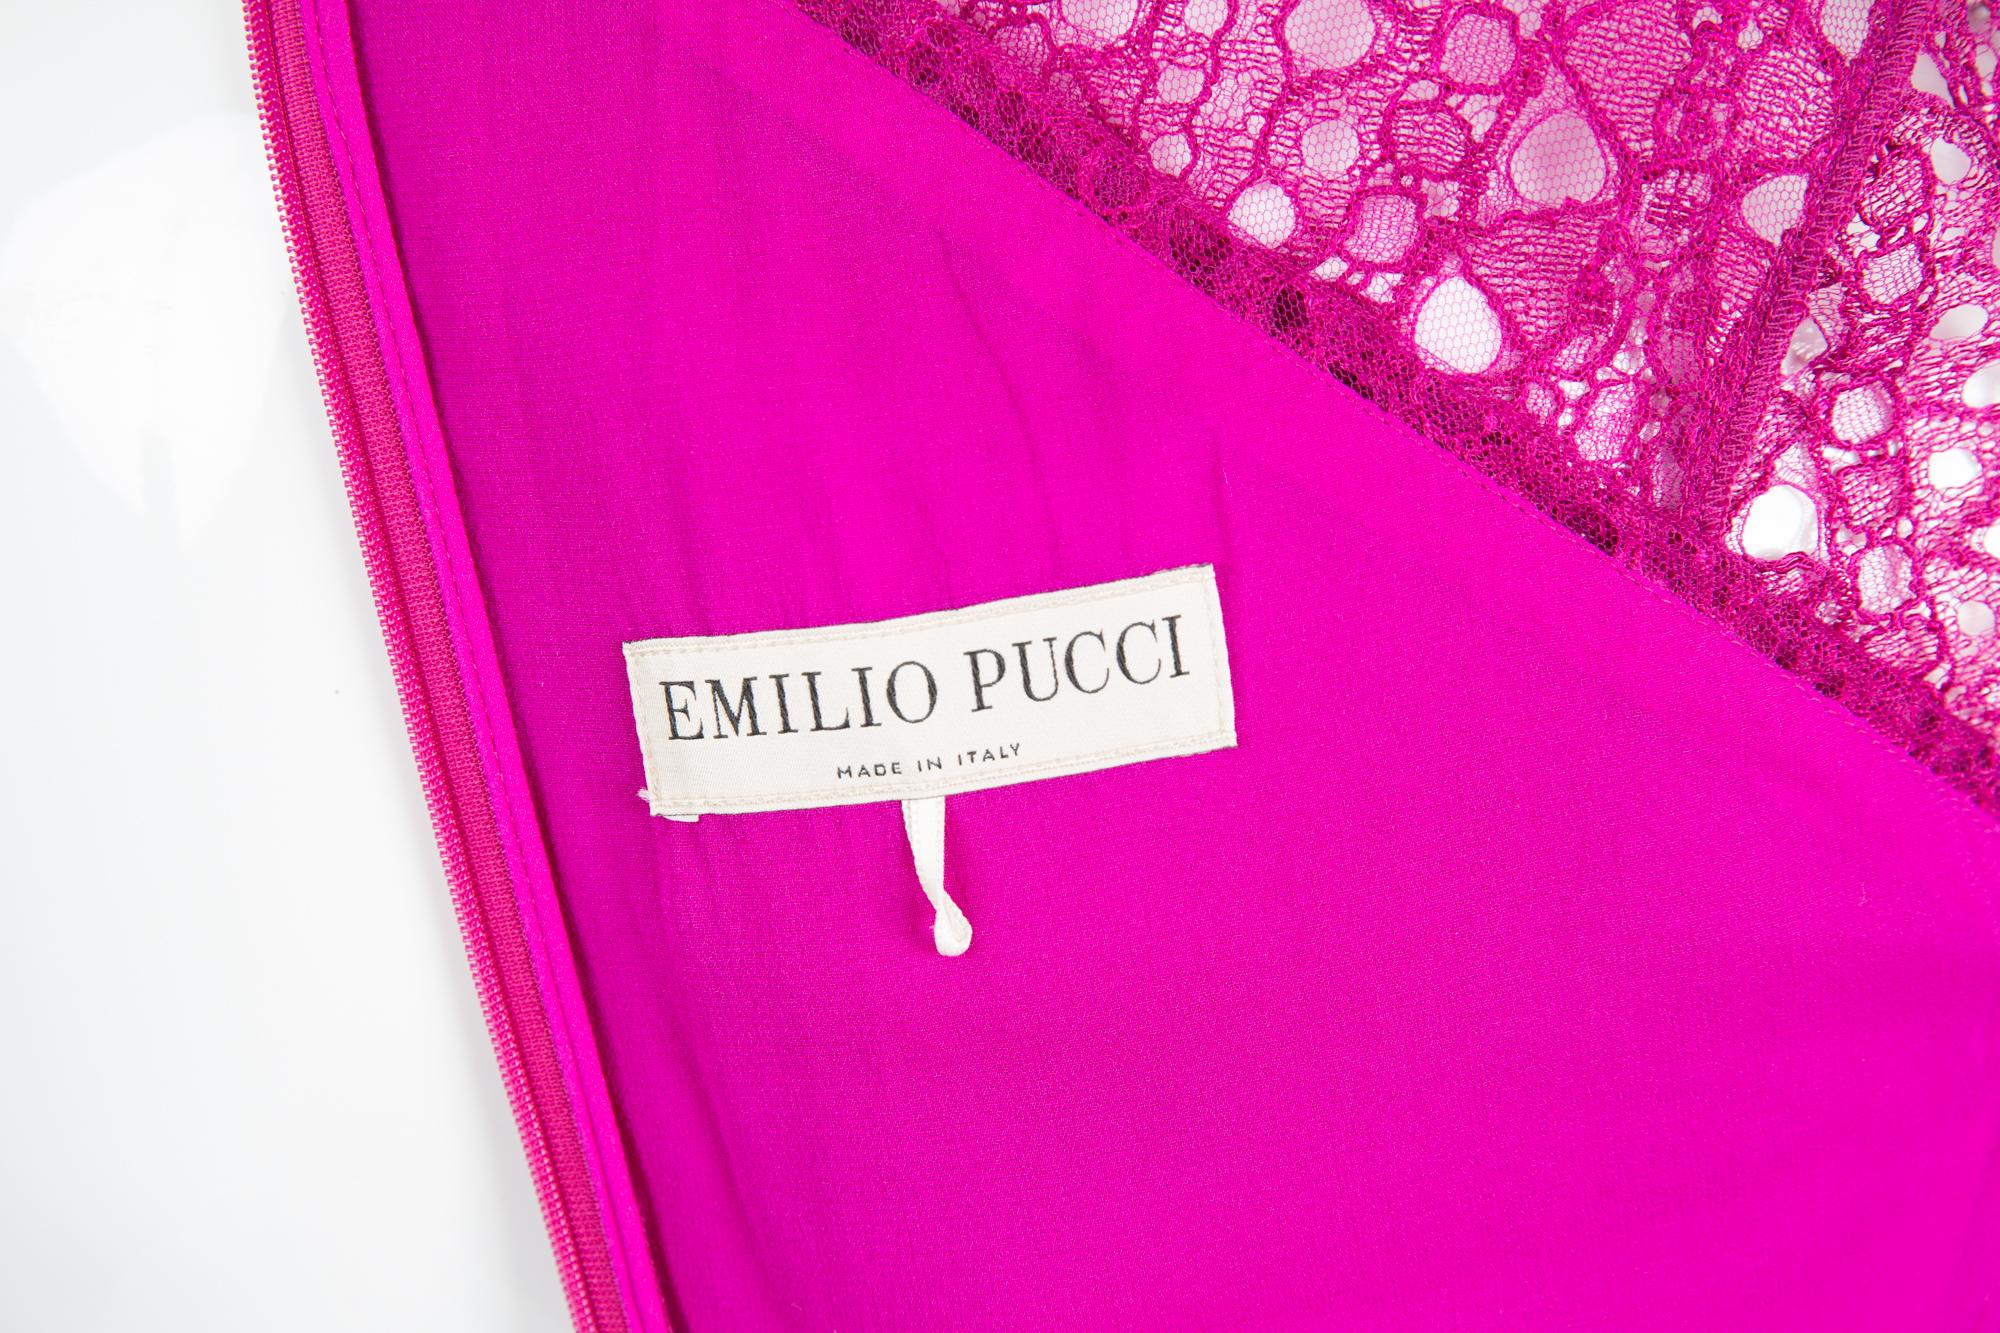 Emilio Pucci Pink Peplum Dress In Good Condition For Sale In Paris, FR